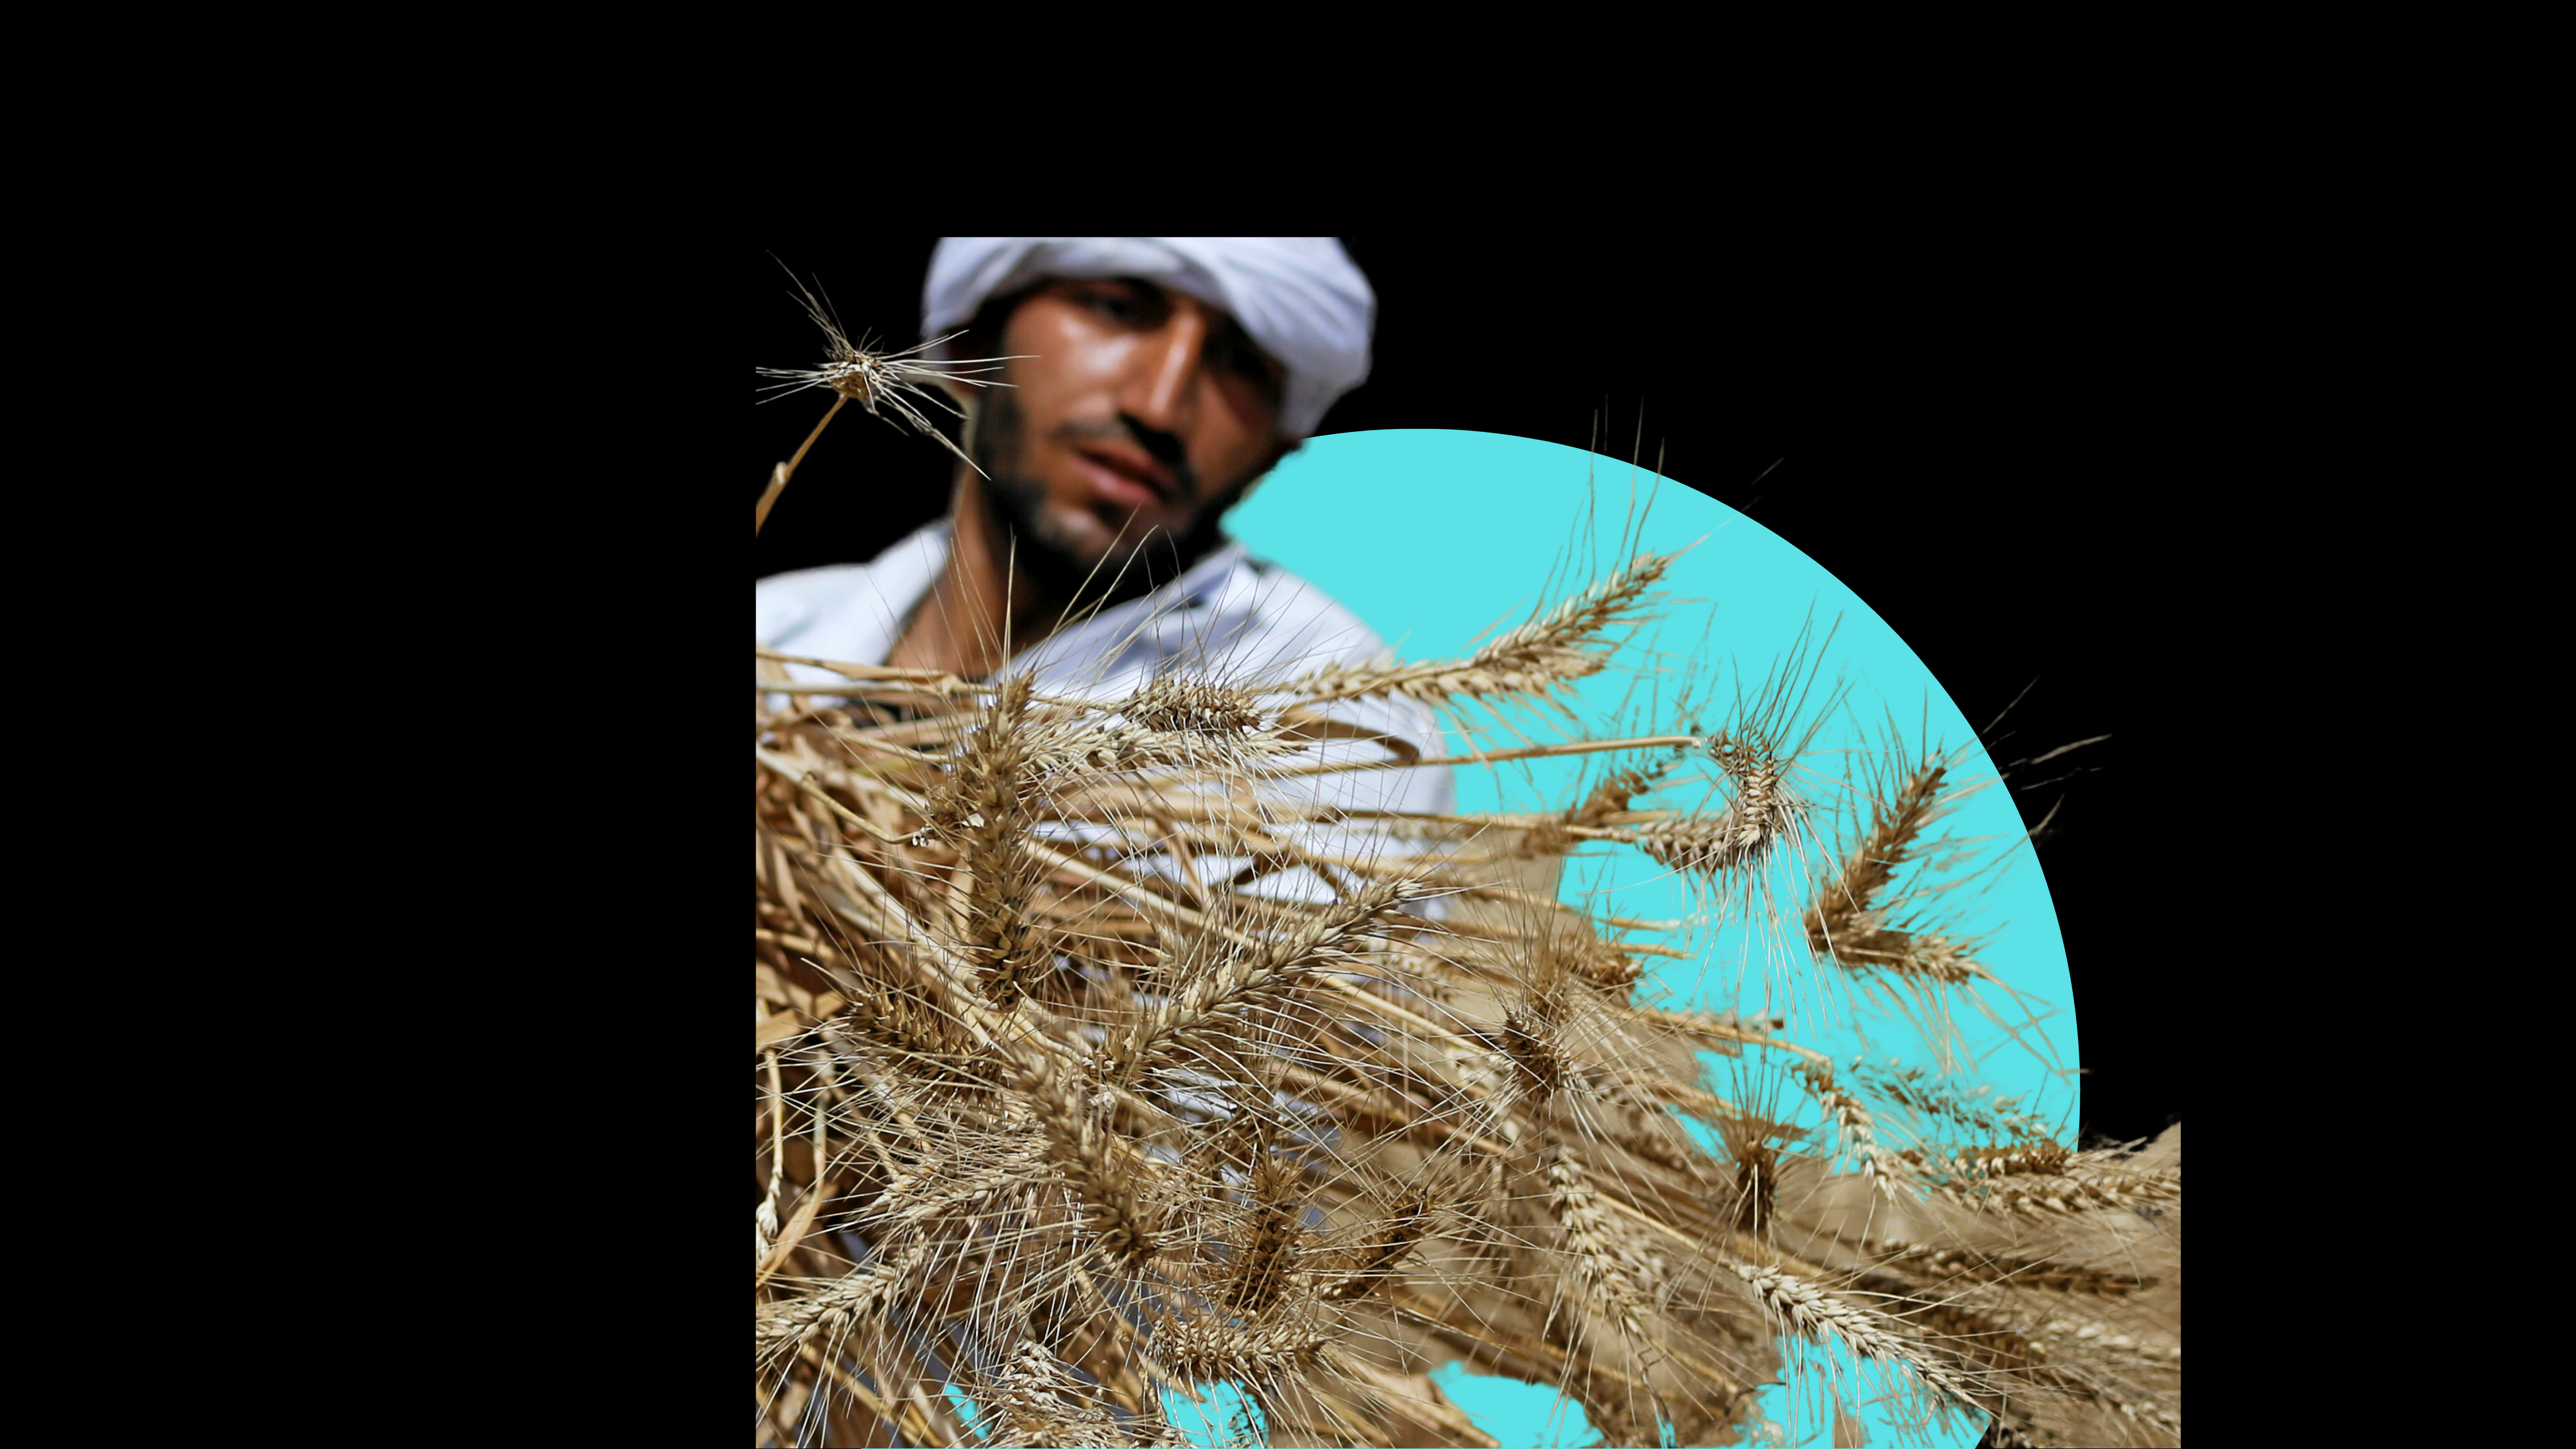 Why Egypt Increased Its Wheat Purchases Tenfold Compared to the Previous Year?